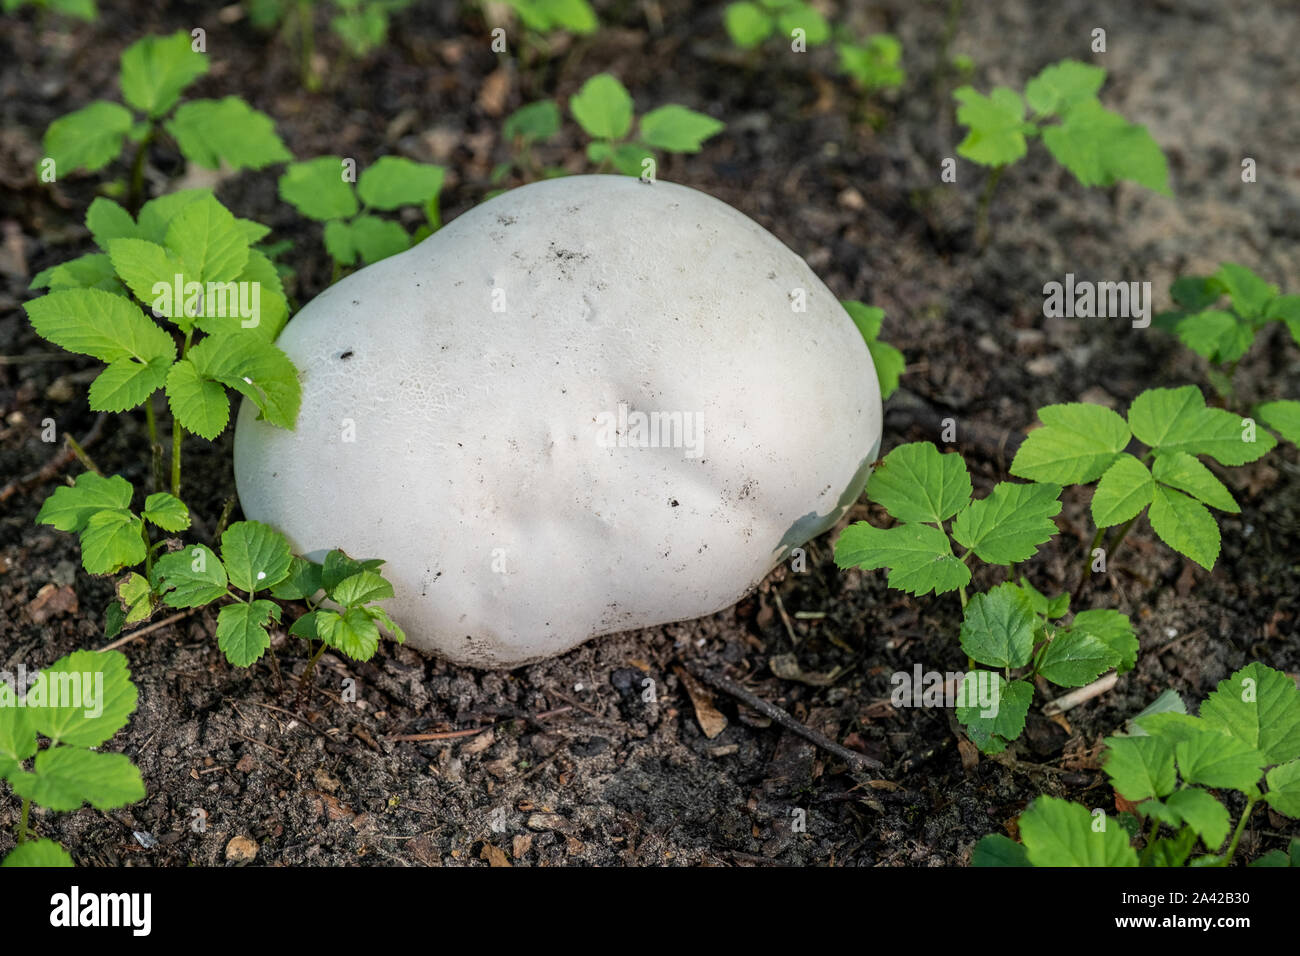 Big Mushroom raincoat grew among still green plants in the deciduous forest. Stock Photo